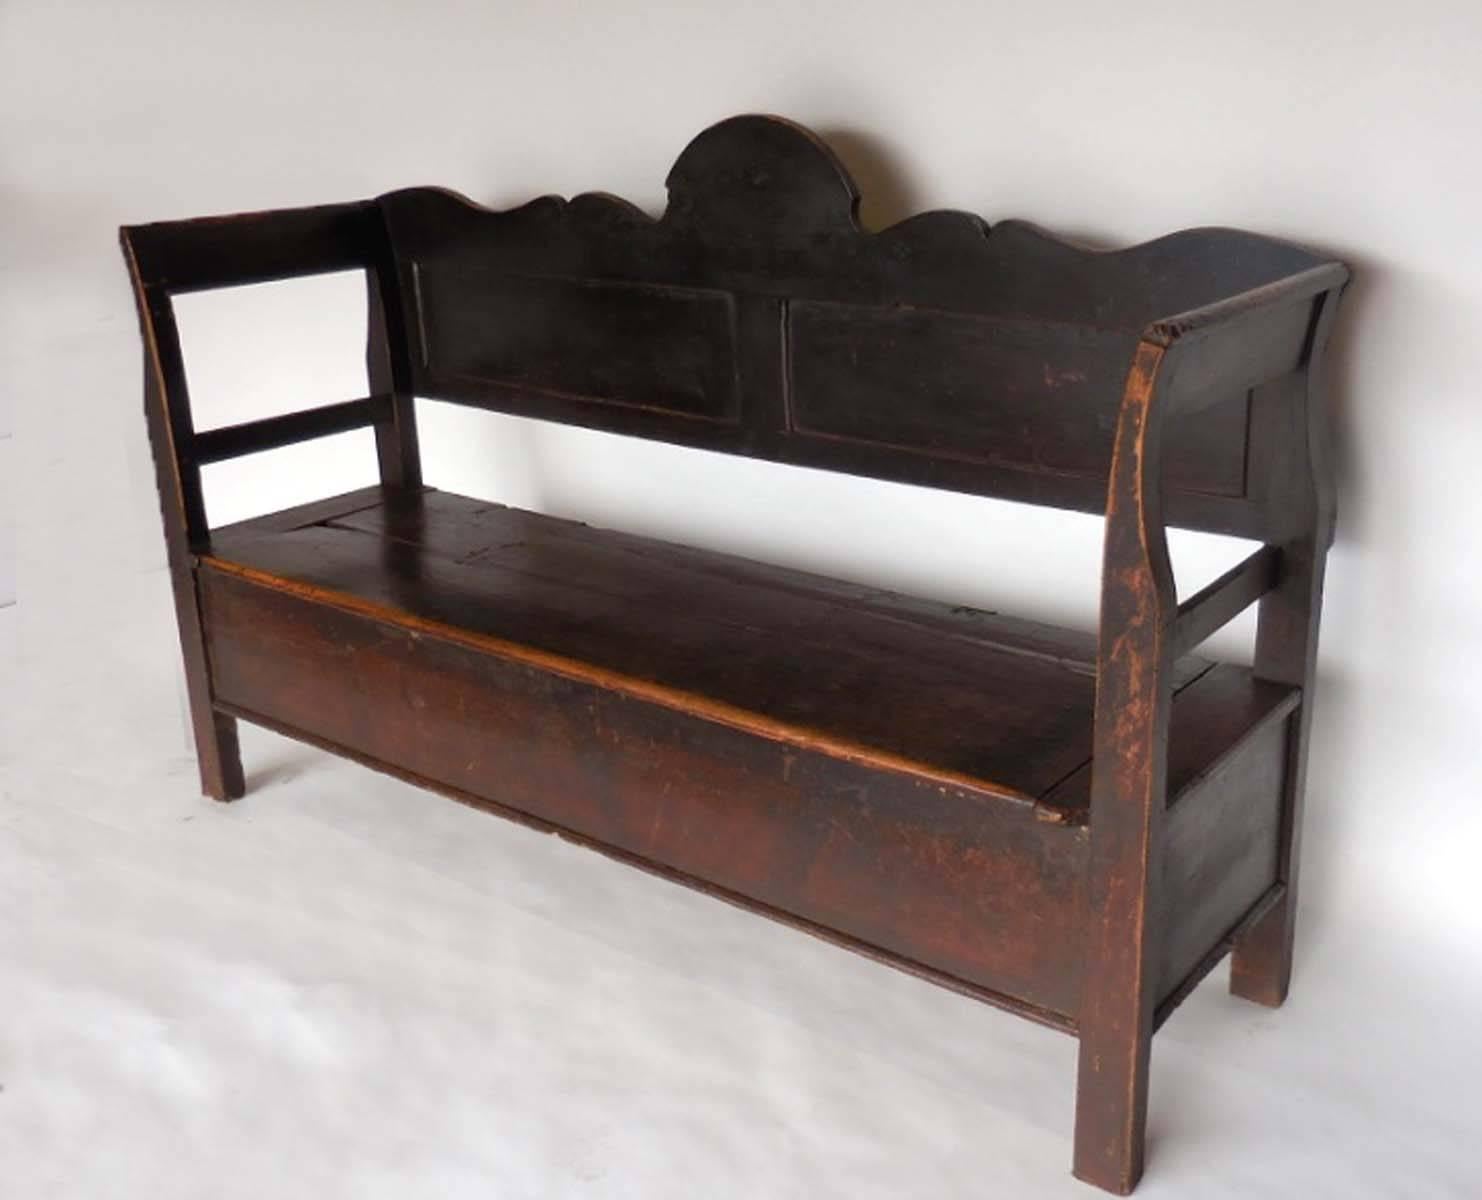 Beautiful bench with a sculptural cut-out back and lift top seat for storage. Old worn dark patina with natural wood showing through around edges. Very smooth. Graceful shape. Pine wood.